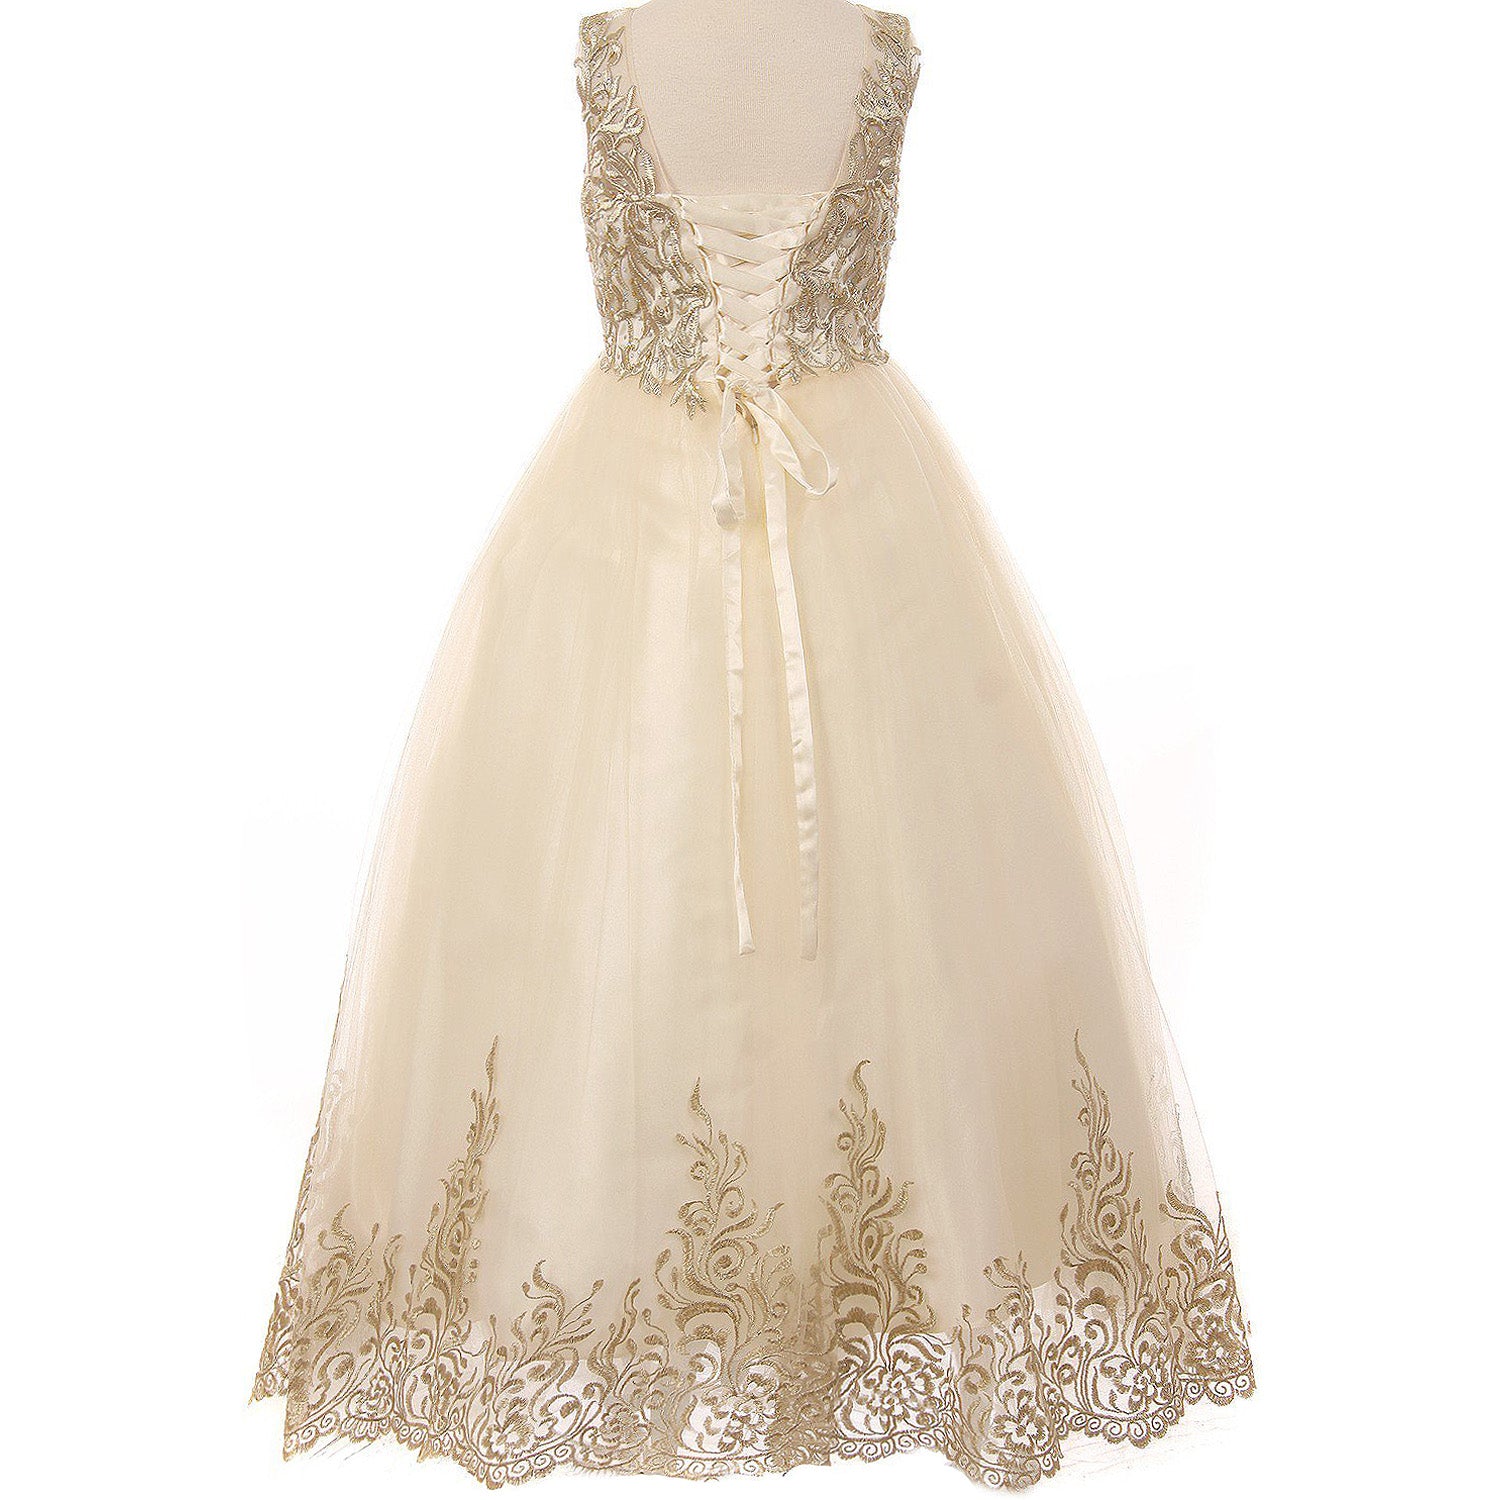 GOLD SATIN CORDED EMBROIDERY TULLE OVERLAY SATIN SKIRT LONG GOWN